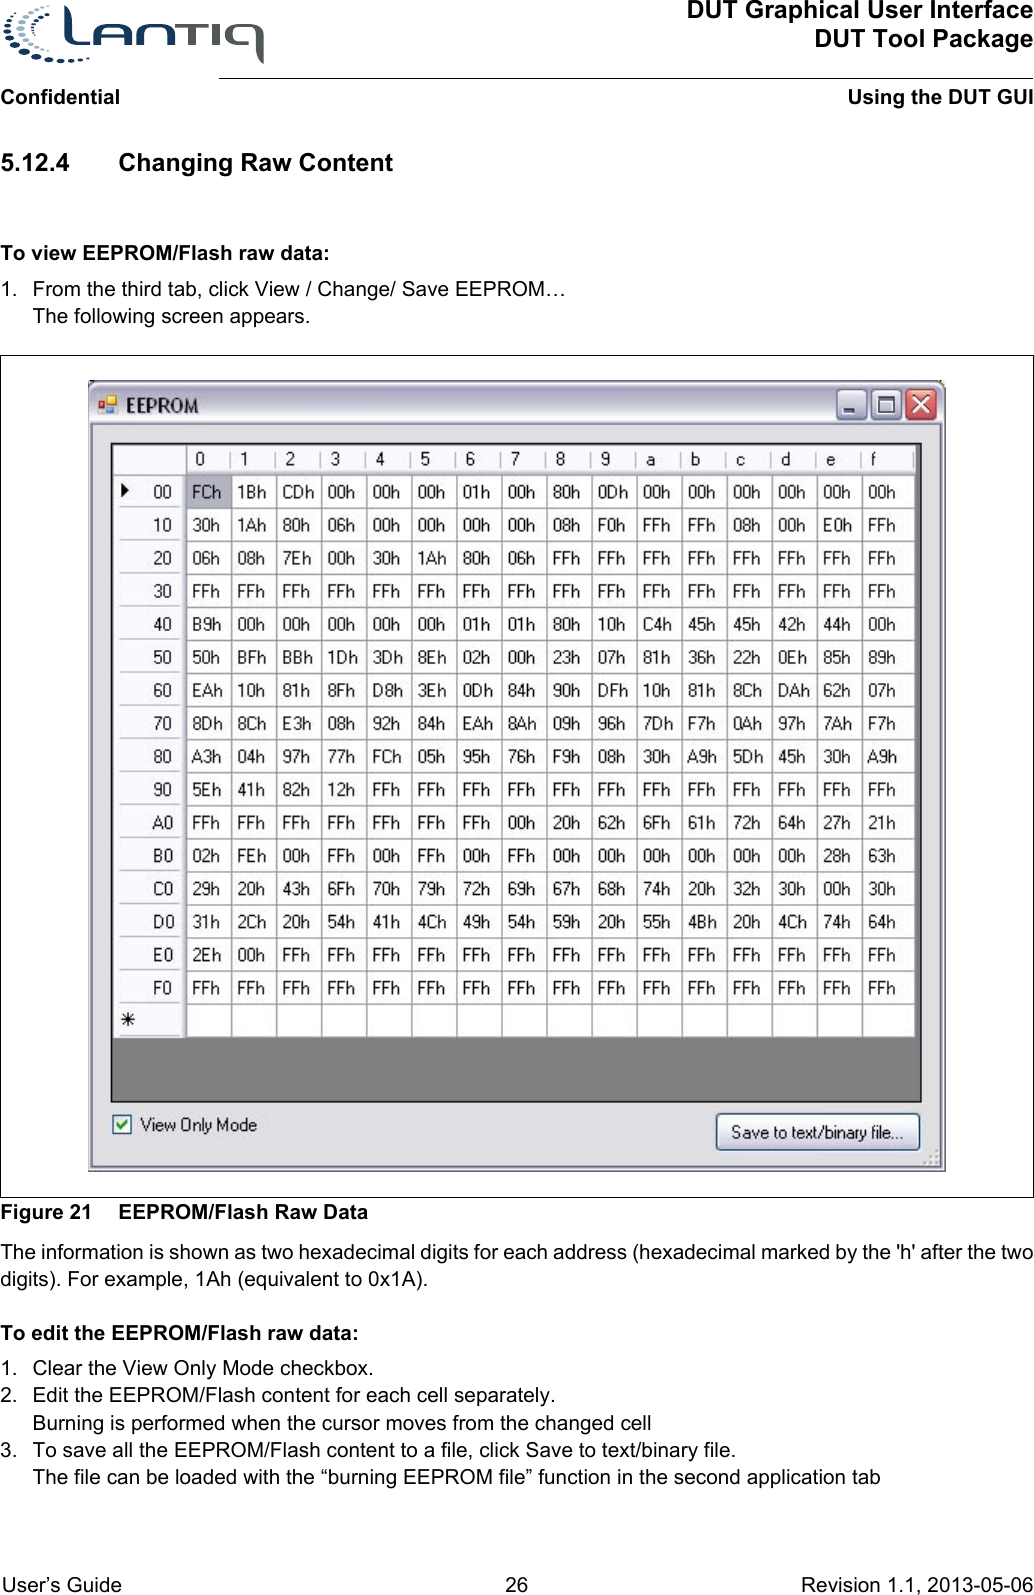 ConfidentialDUT Graphical User InterfaceDUT Tool PackageUsing the DUT GUI User’s Guide 26 Revision 1.1, 2013-05-06      5.12.4 Changing Raw ContentTo view EEPROM/Flash raw data:1. From the third tab, click View / Change/ Save EEPROM… The following screen appears.Figure 21 EEPROM/Flash Raw DataThe information is shown as two hexadecimal digits for each address (hexadecimal marked by the &apos;h&apos; after the two digits). For example, 1Ah (equivalent to 0x1A).To edit the EEPROM/Flash raw data:1. Clear the View Only Mode checkbox.2. Edit the EEPROM/Flash content for each cell separately.Burning is performed when the cursor moves from the changed cell3. To save all the EEPROM/Flash content to a file, click Save to text/binary file.The file can be loaded with the “burning EEPROM file” function in the second application tab